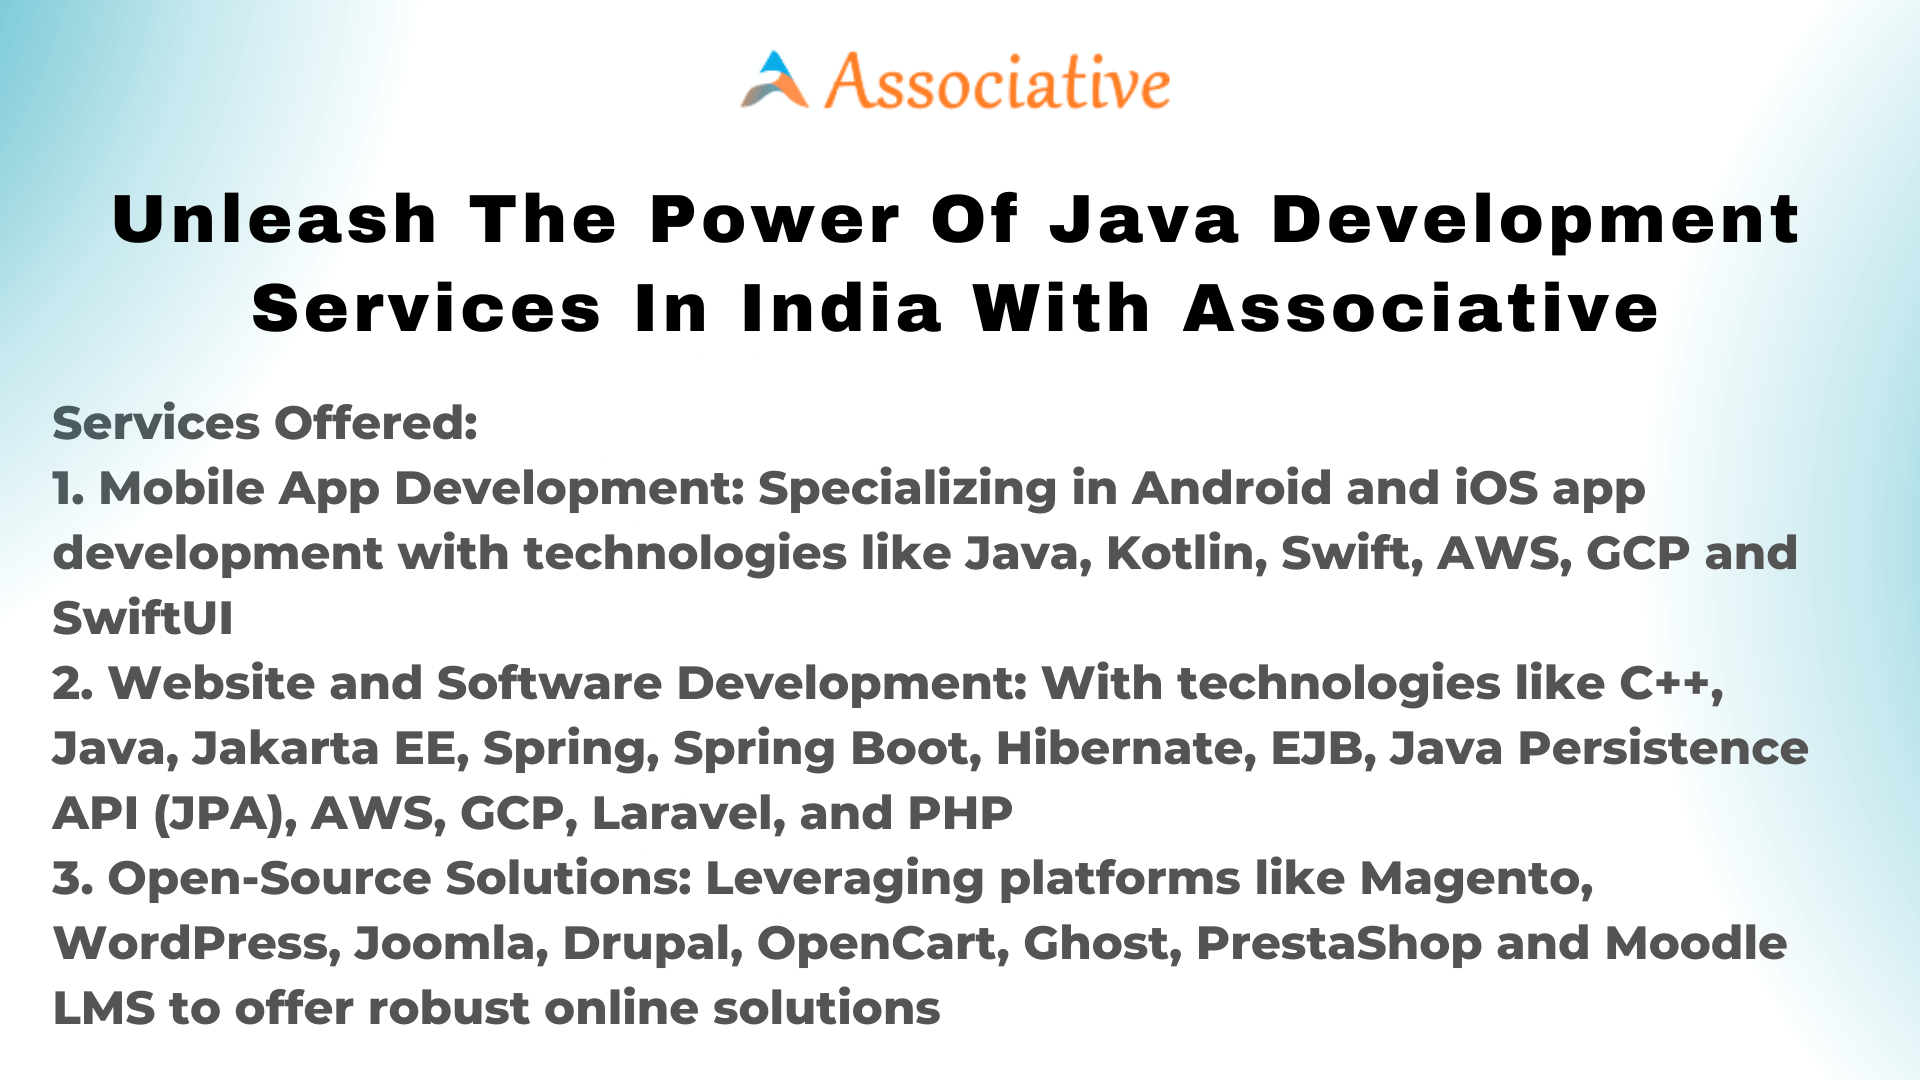 Unleash the Power of Java Development Services in India with Associative